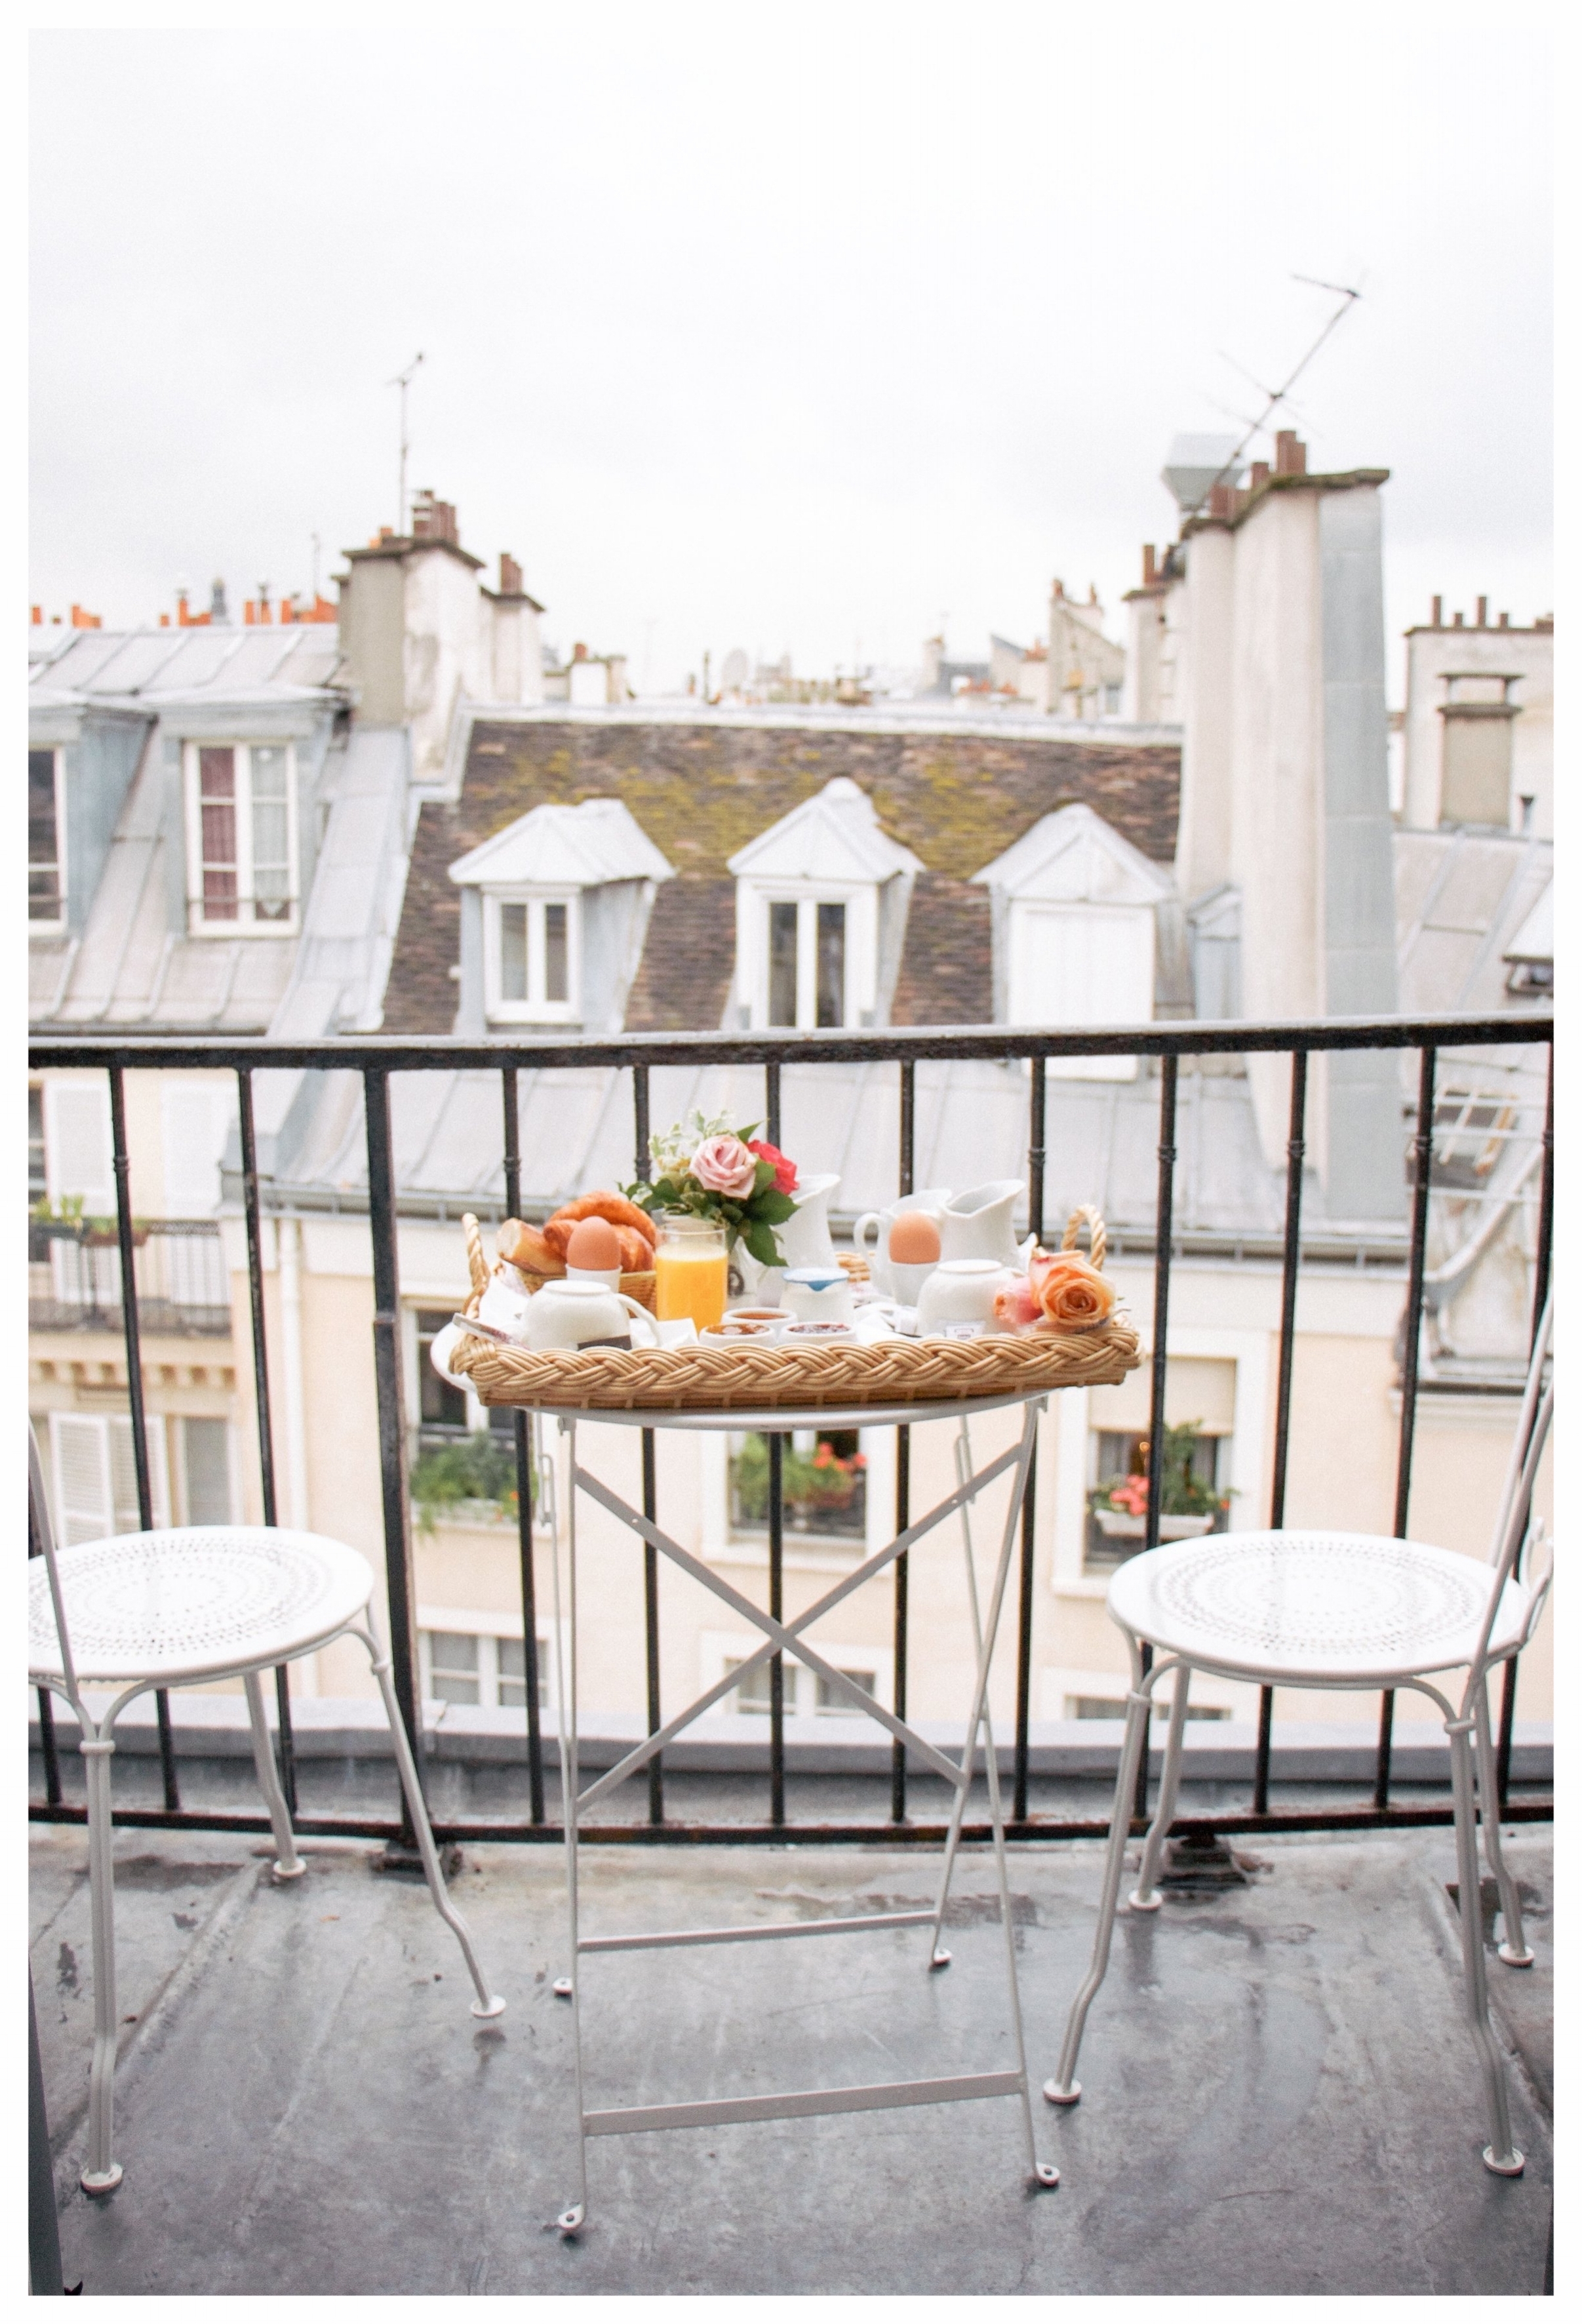 The Most Charming Boutique Hotel in Paris, France | This budget-friendly boutique hotel in the heart of the Marais is one of the most romantic places to stay in the City of Light. Hotel Caron de Beaumarchais has affordable rates, wonderful service, …